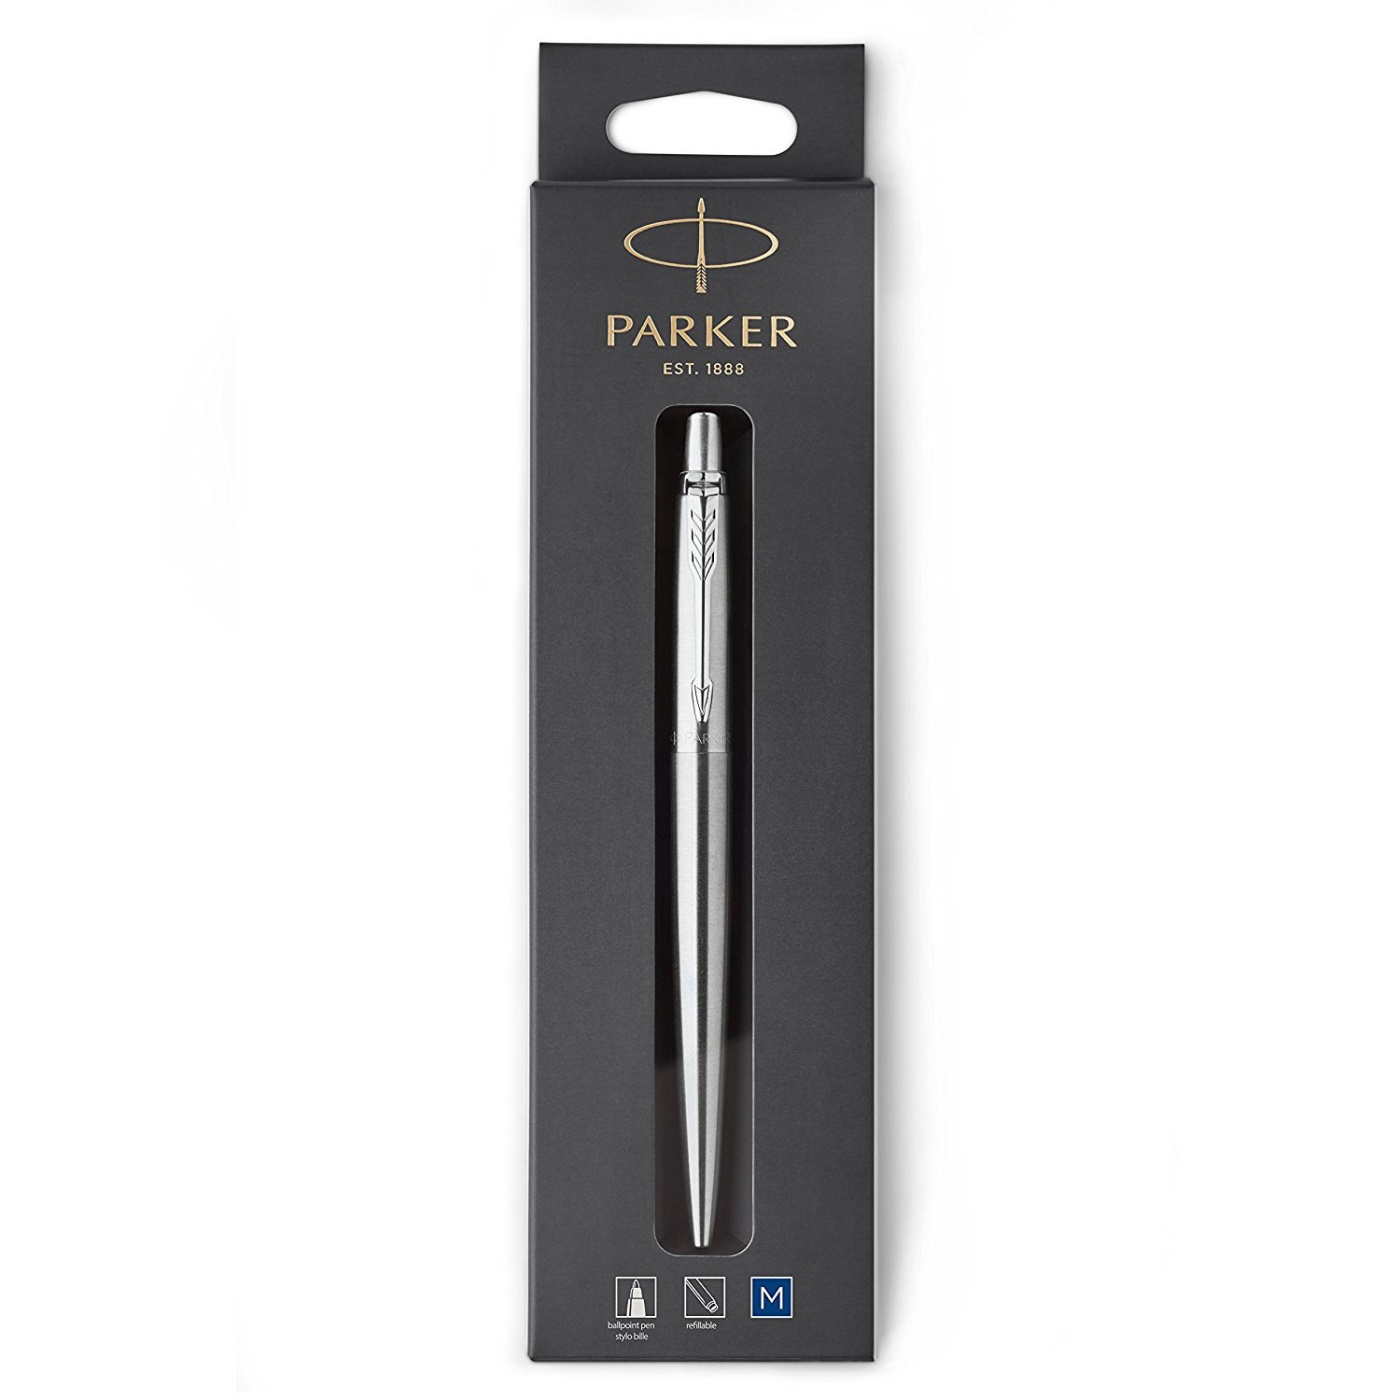 Jotter Steel Ballpoint in the group Pens / Fine Writing / Gift Pens at Voorcrea (104678)